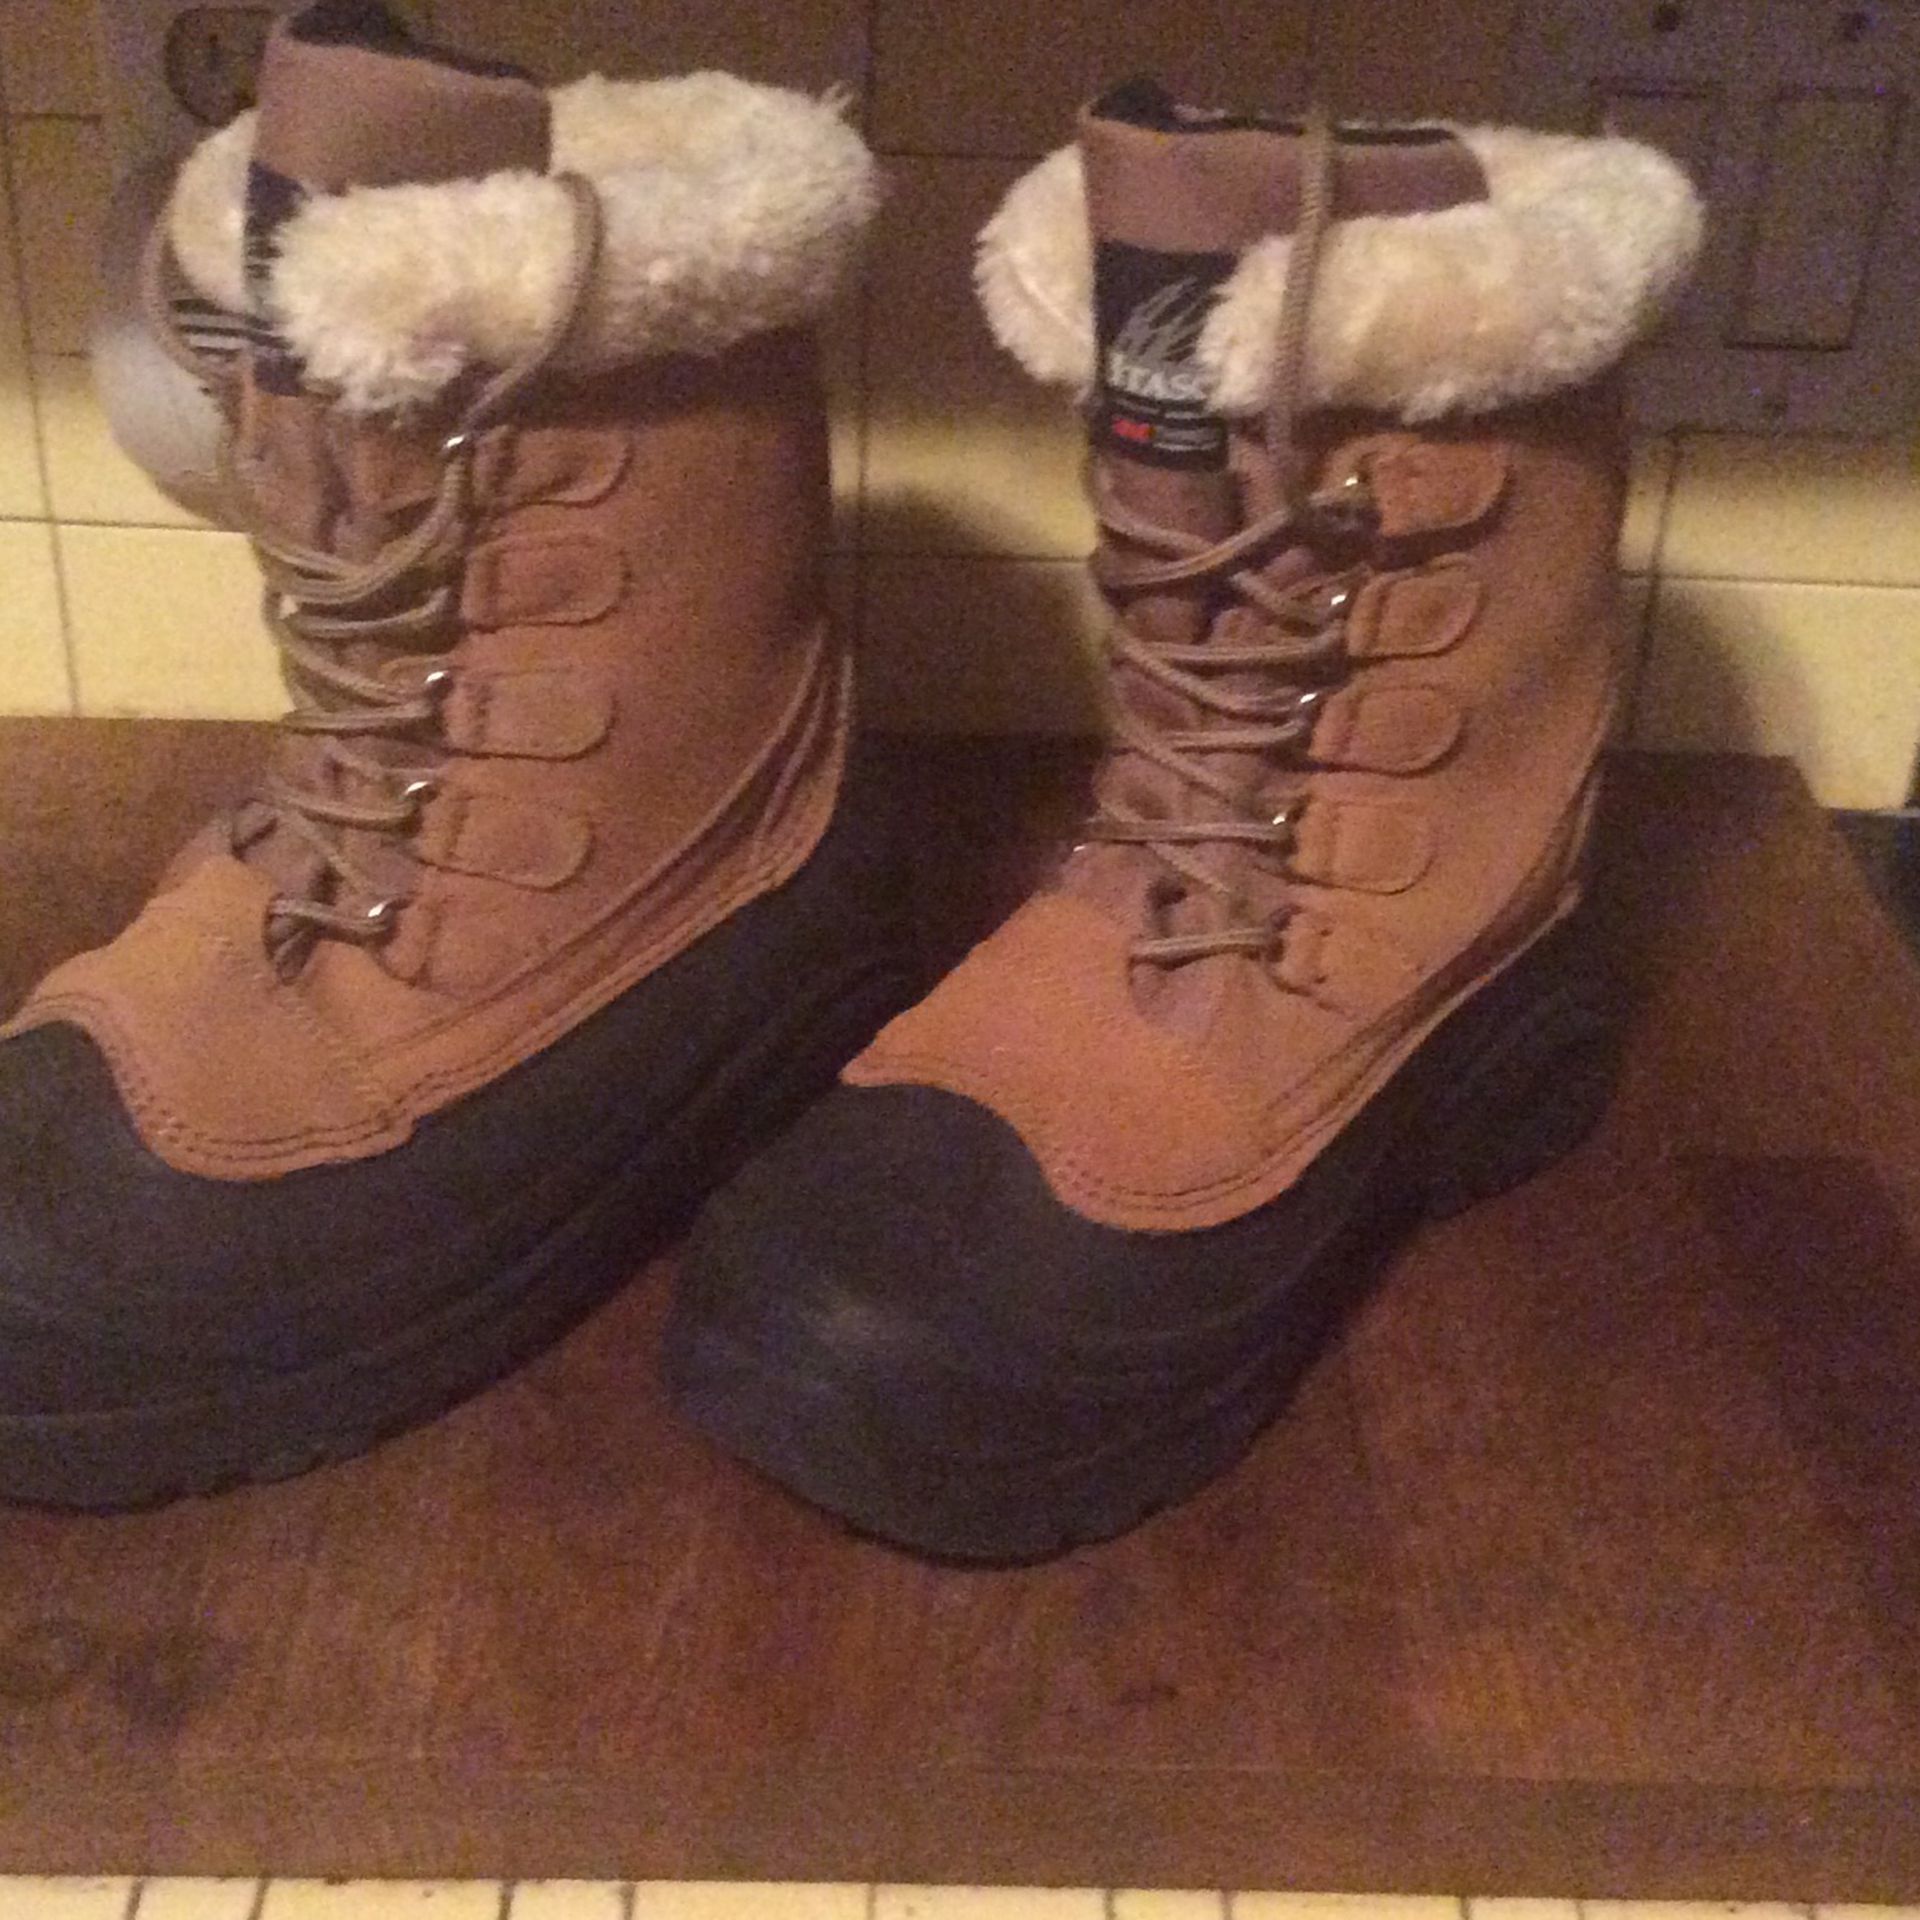 New ITASCA Ladies Boots. Size 7.